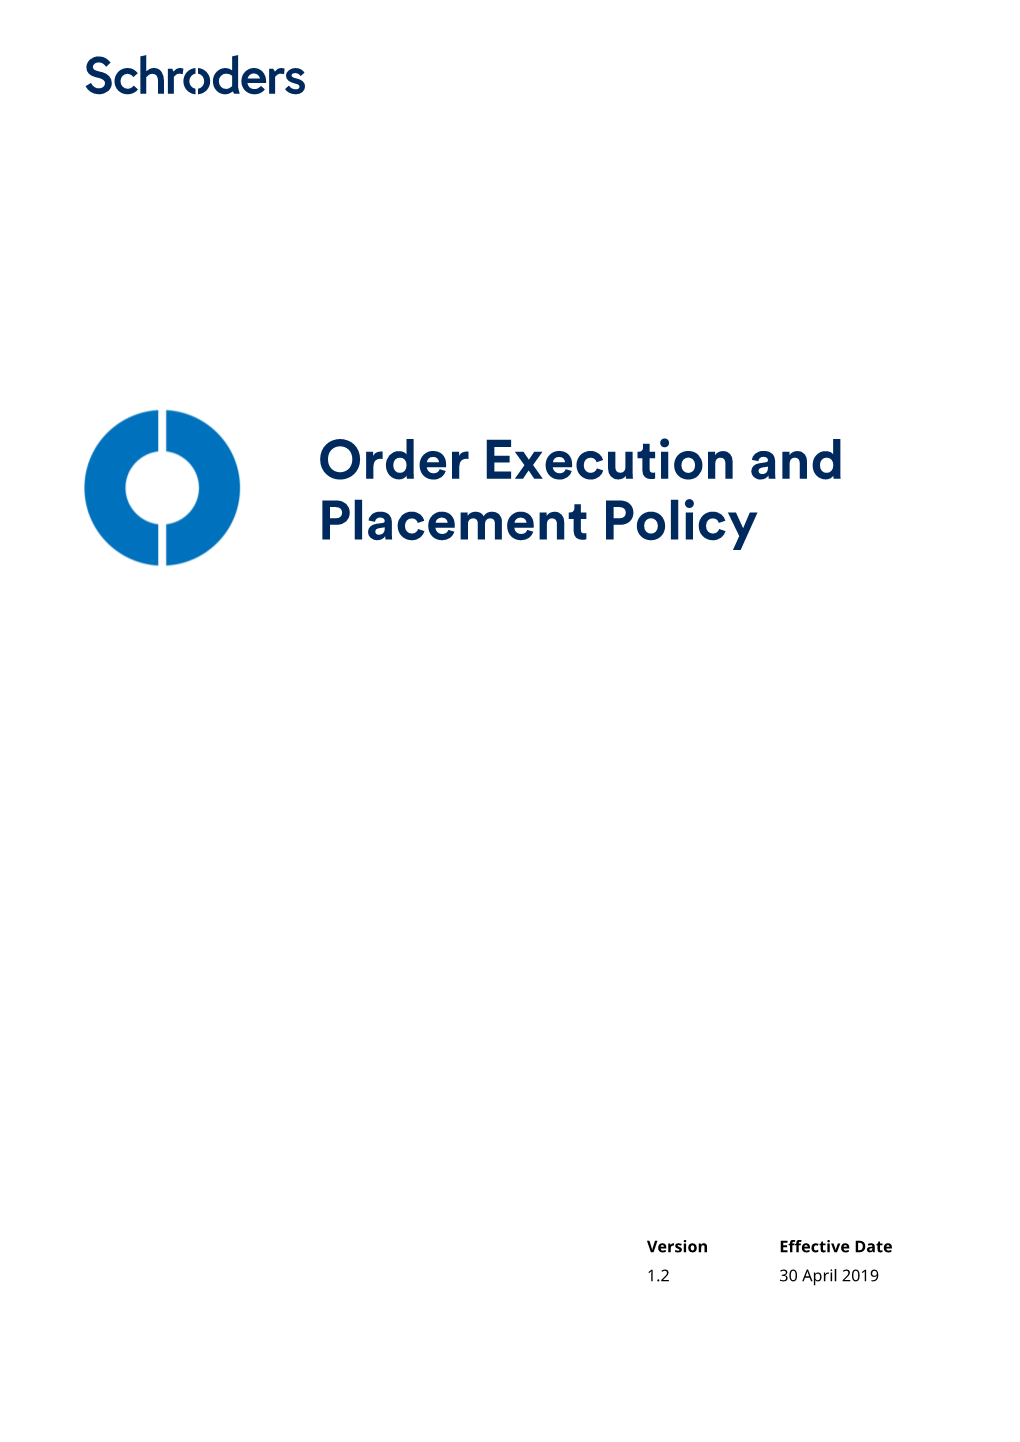 Order Execution and Placement Policy